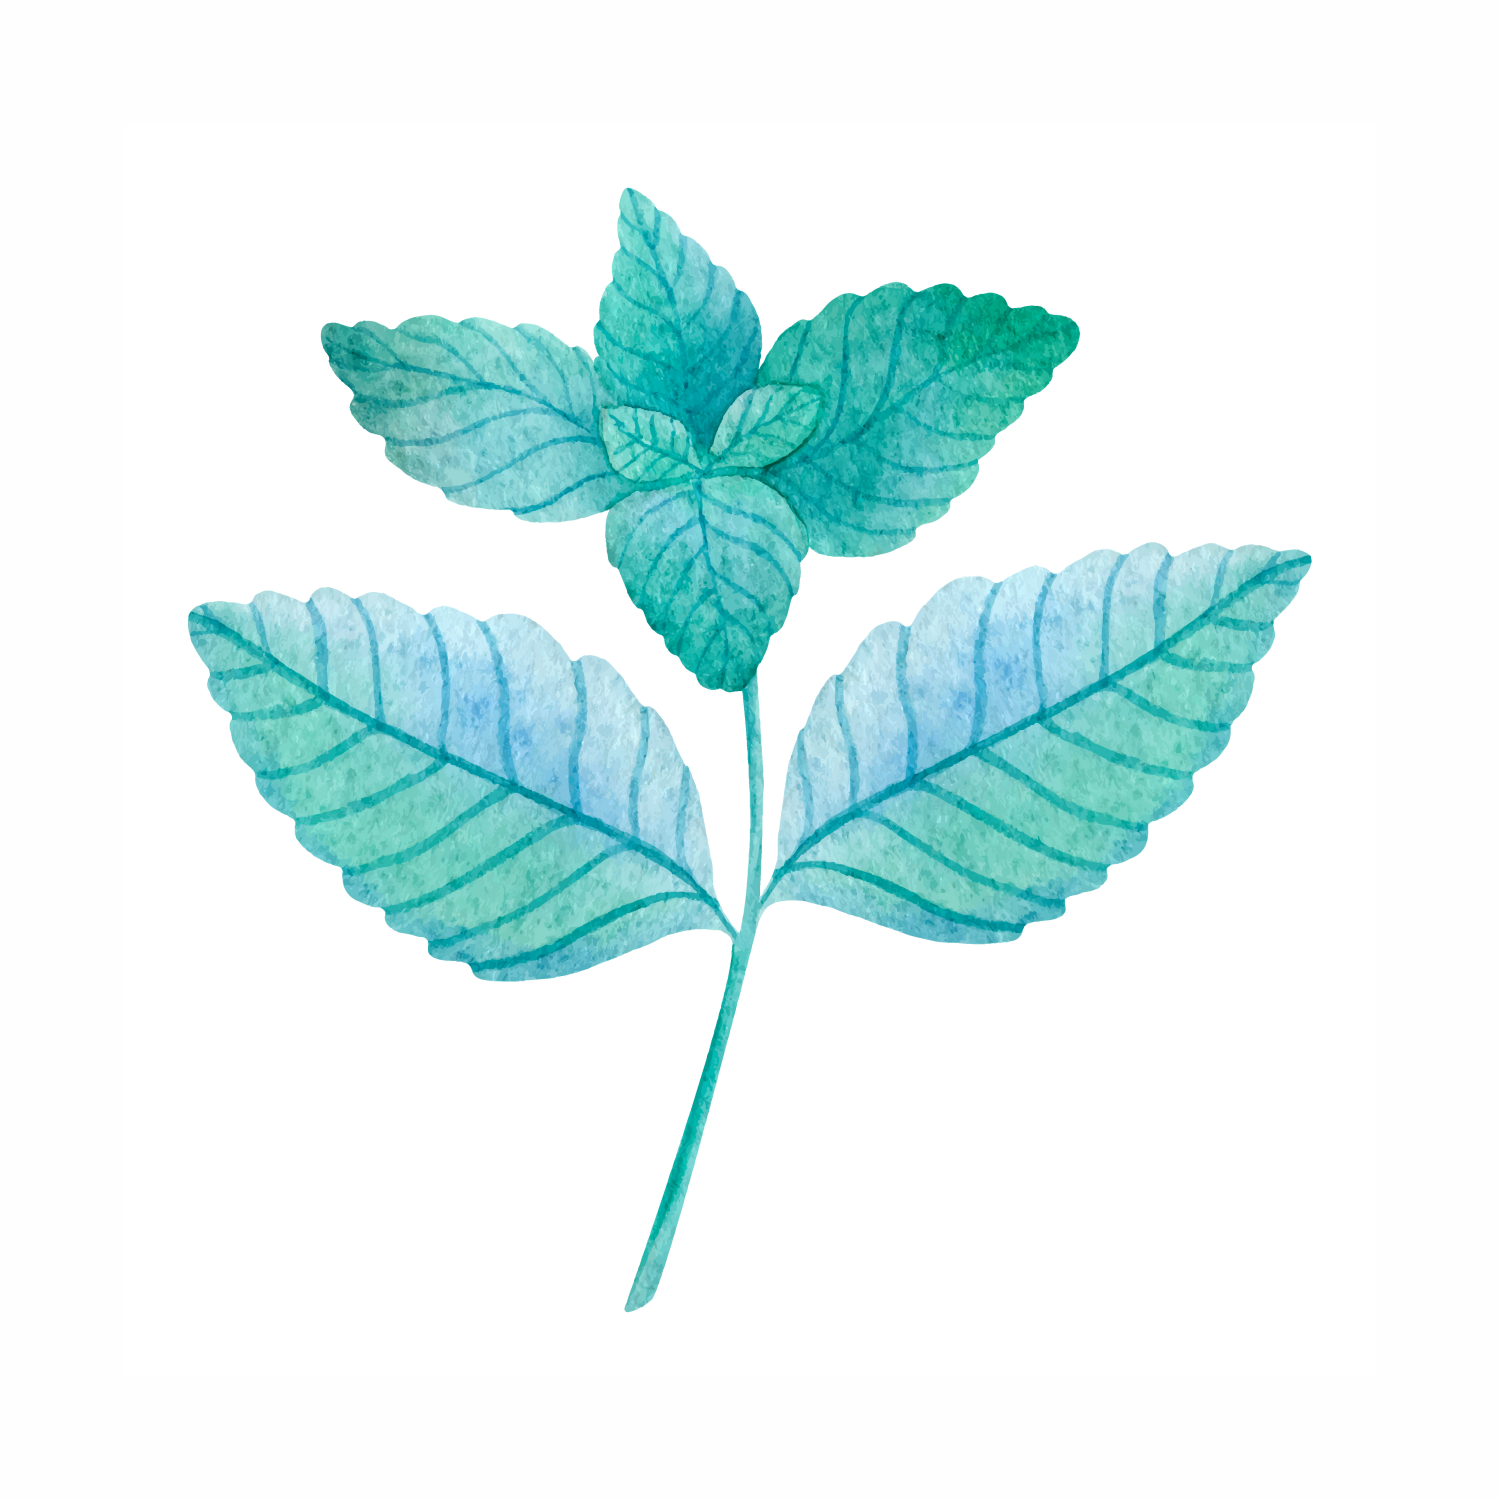 Mentha Arvensis (Wild Mint) Leaf Extract: Nature's Cooling Kiss for Your Skin